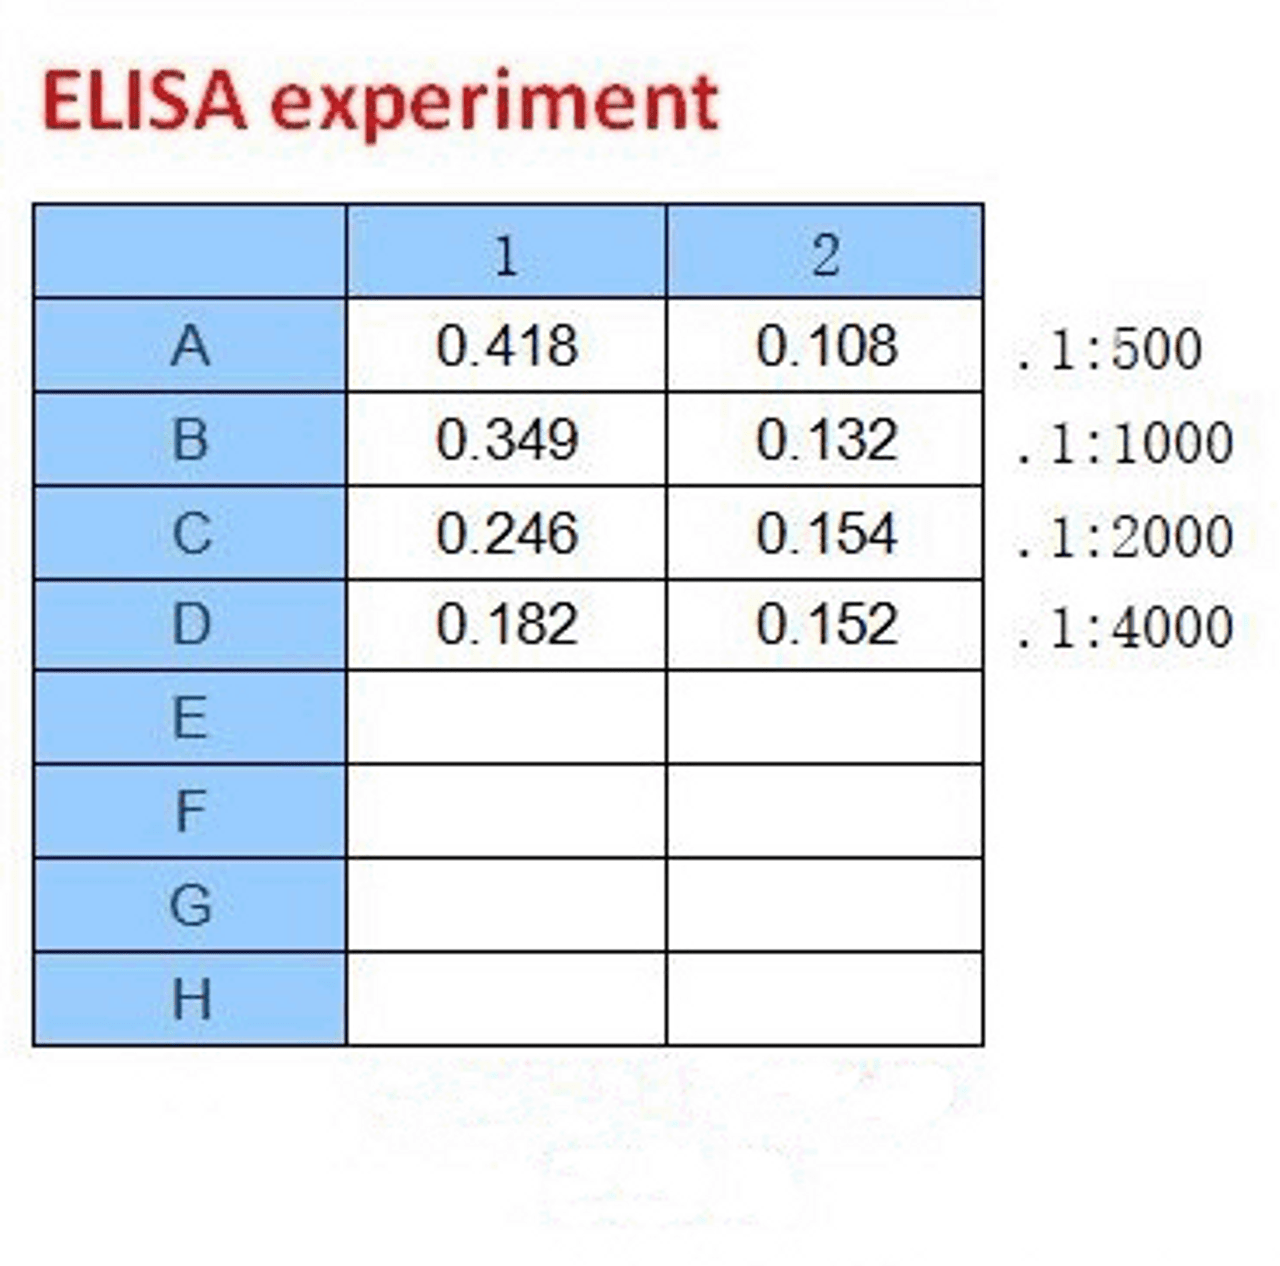 <strong>Figure 2 ELISA Test</strong><br>
Coating original concentration: 2 ug/mL, 100 uL/well samples are column 1: SARS-CoV-2 (COVID-19) Spike-ECD Recombinant Protein, 10-011, and column 2: SARS-CoV-2 (COVID-19) Spike-RBD Recombinant Protein, 10-008.<br>Antibodies: SARS-CoV-2 (COVID-19) Spike S2 Antibody, 10-527.<br>Secondary: Goat anti-rabbit IgG HRP conjugate at 1:10000 dilution.<br>Develop: 15min, 100 uL/well.<br>Stop: Stop buffer 50 uL/well.